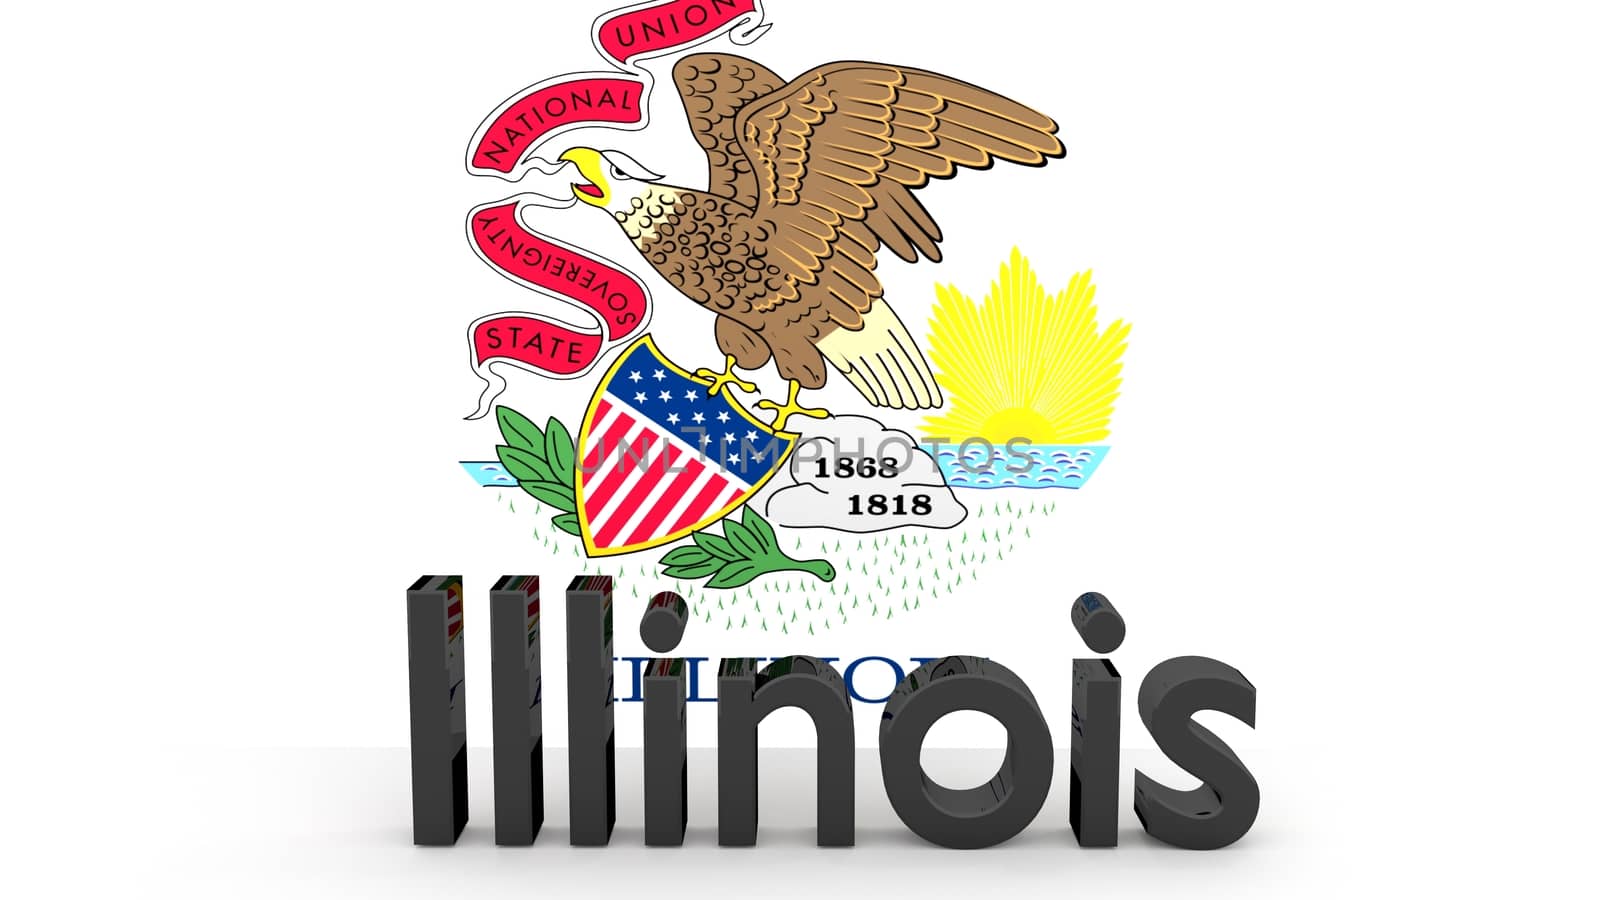 US state Illinois, metal name in front of flag by MarkDw